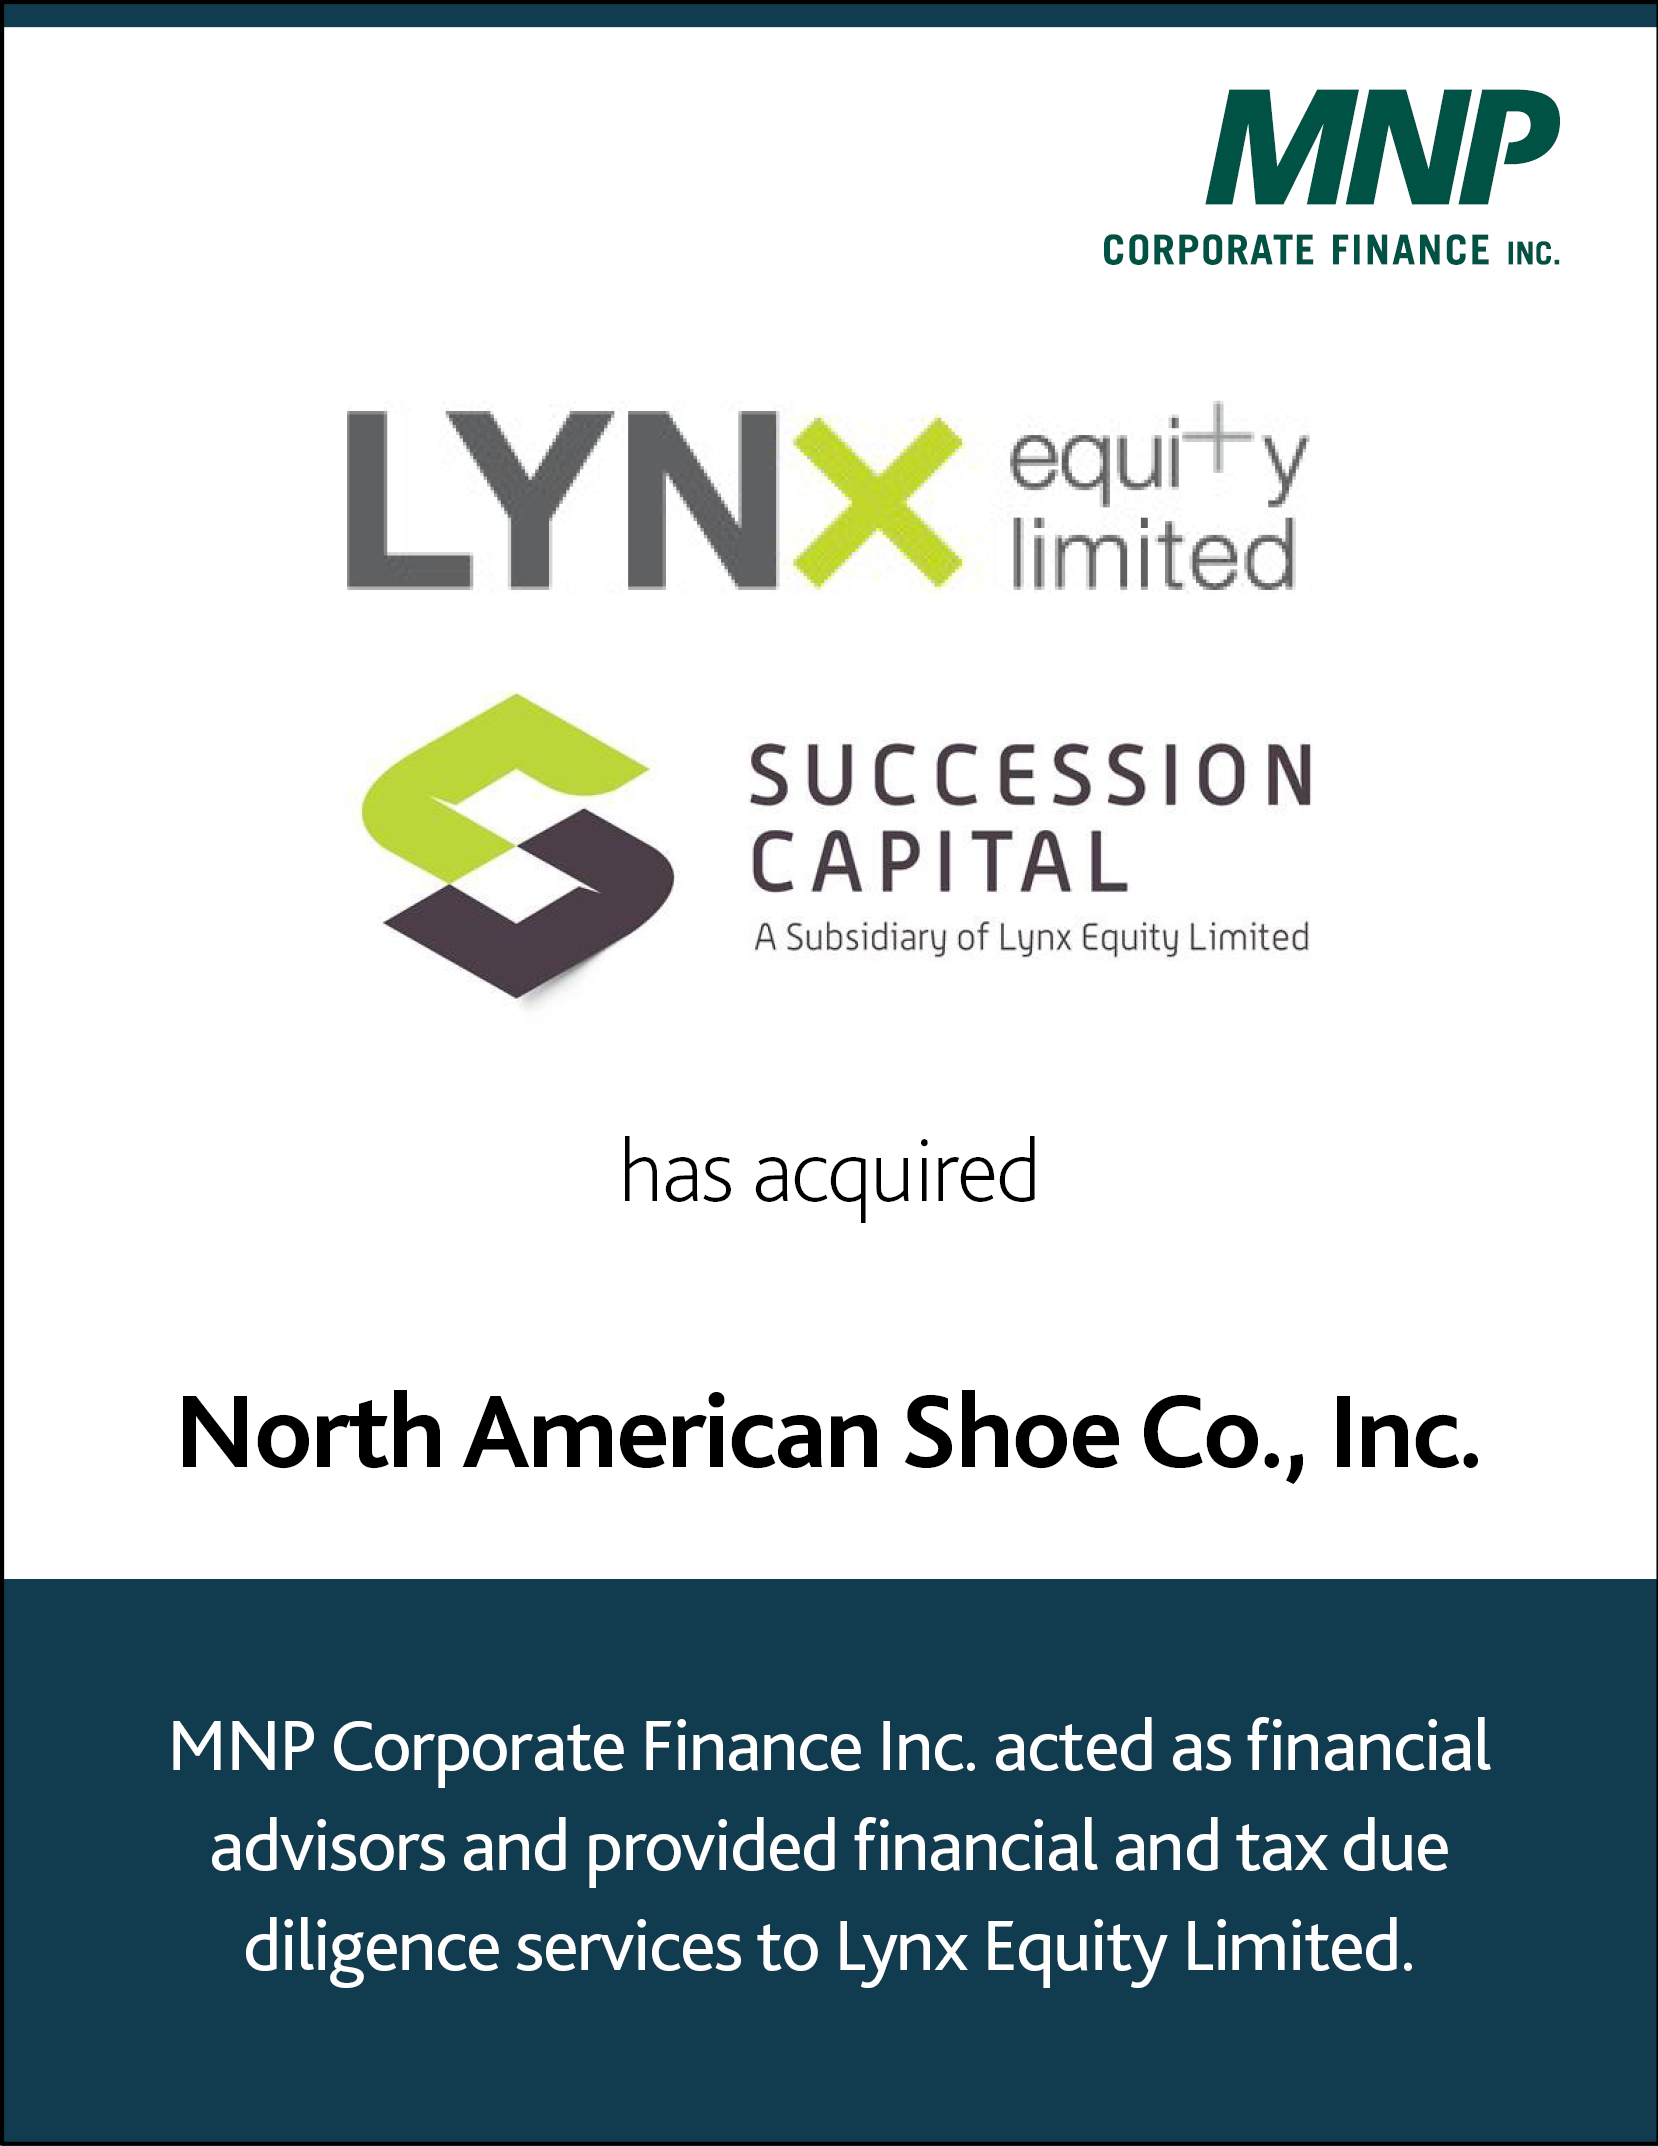 LYNX Equity Limited Succession Capital has acquired North American Shoe Co. Inc 